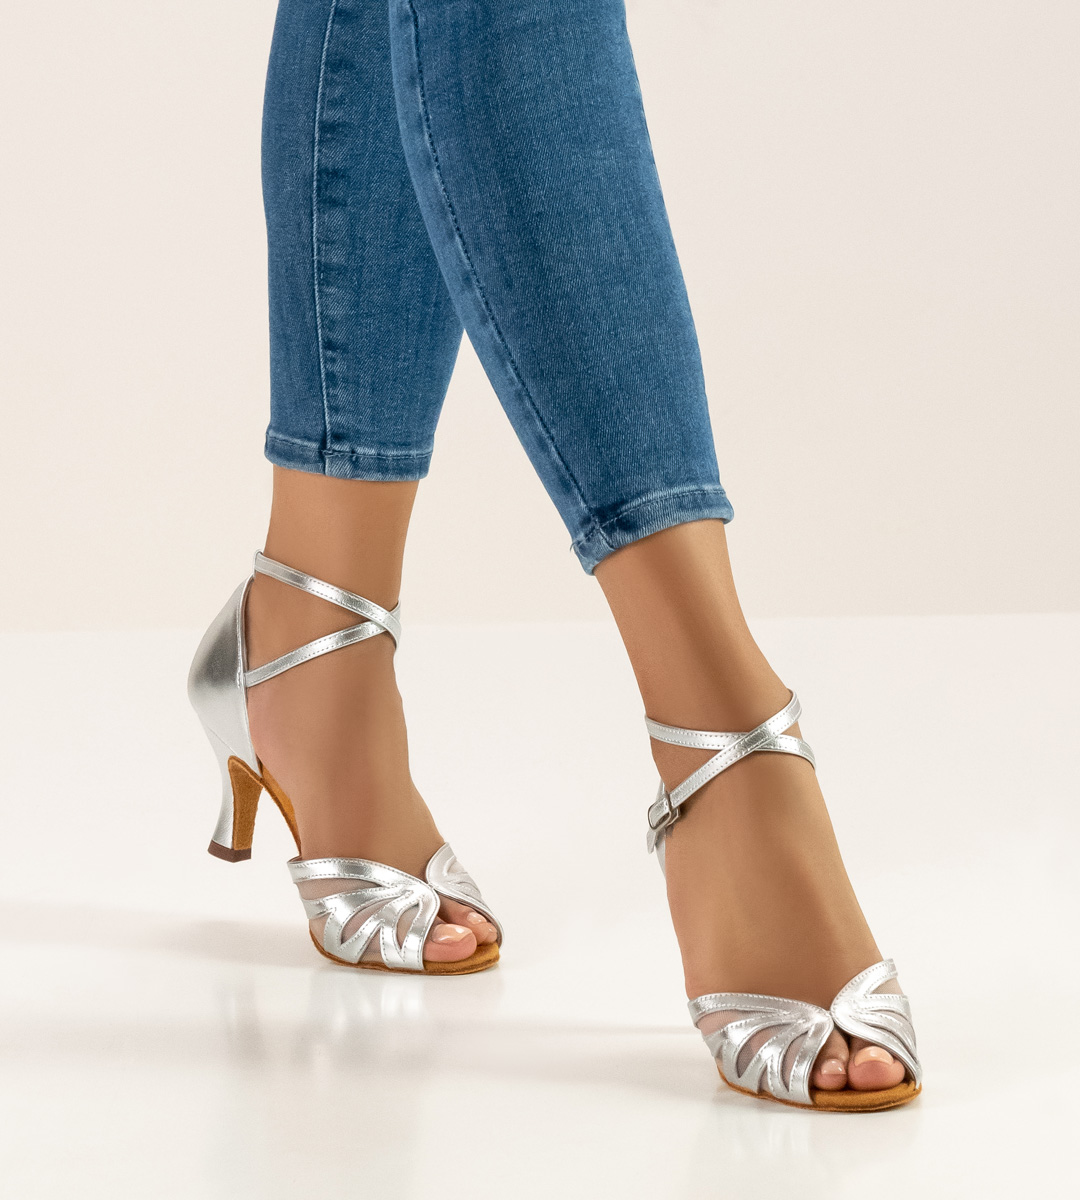 Ladies' Latin dance shoe by Anna Kern with ankle strap combined with blue jeans